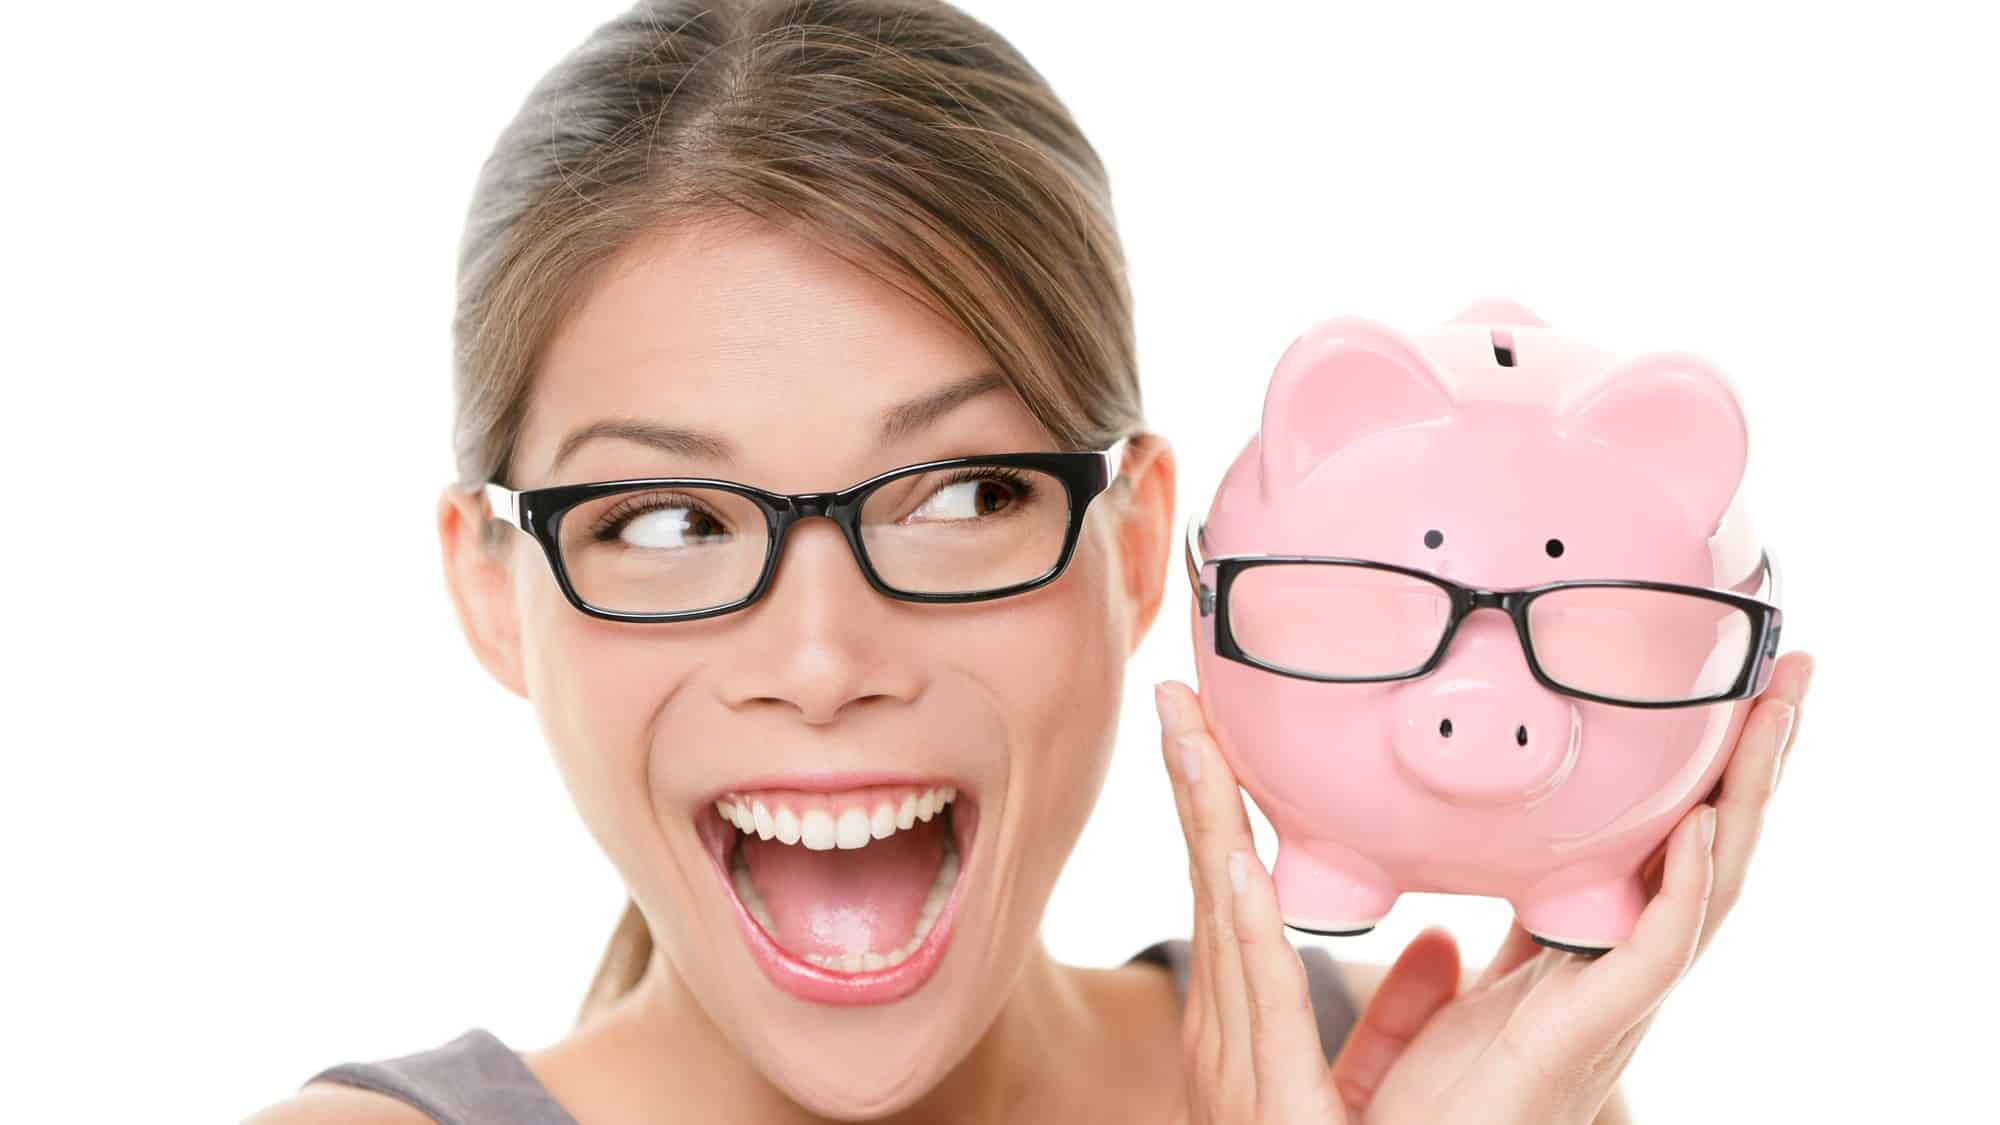 rising asx share price represented by smiling woman holding piggy bank